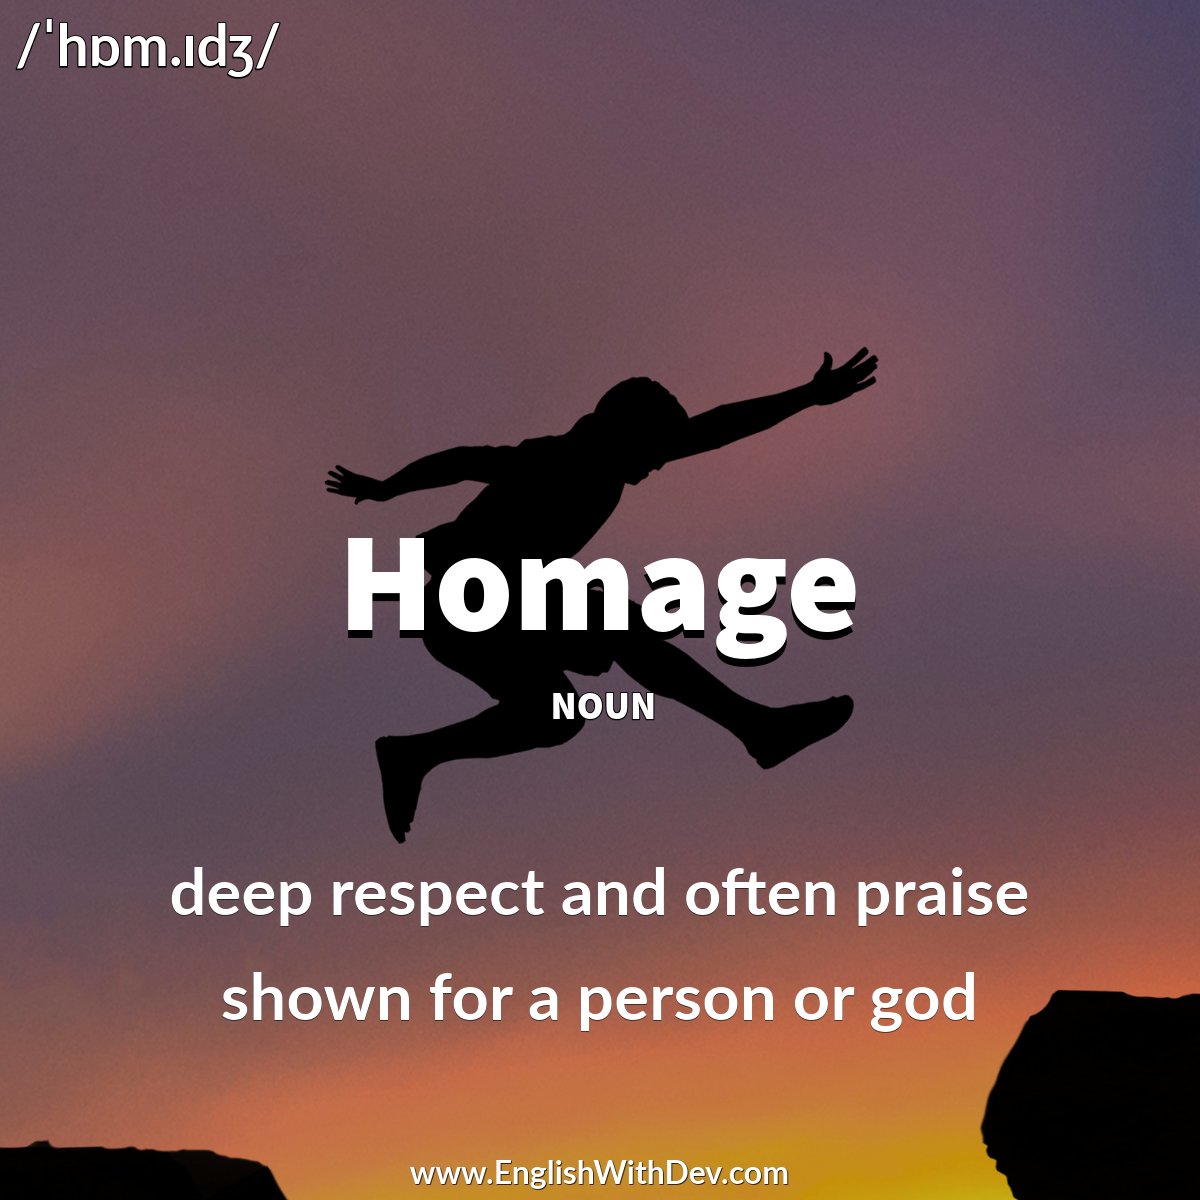 Word - Homage (🗣️ ˈhɒm.ɪdʒ)

Meaning - deep respect and often praise shown for a person or god

Example - On this occasion we pay homage to him for his achievements.

#EnglishWithDev #wordoftheday #Homage #ieltsvocabulary #vocabulary